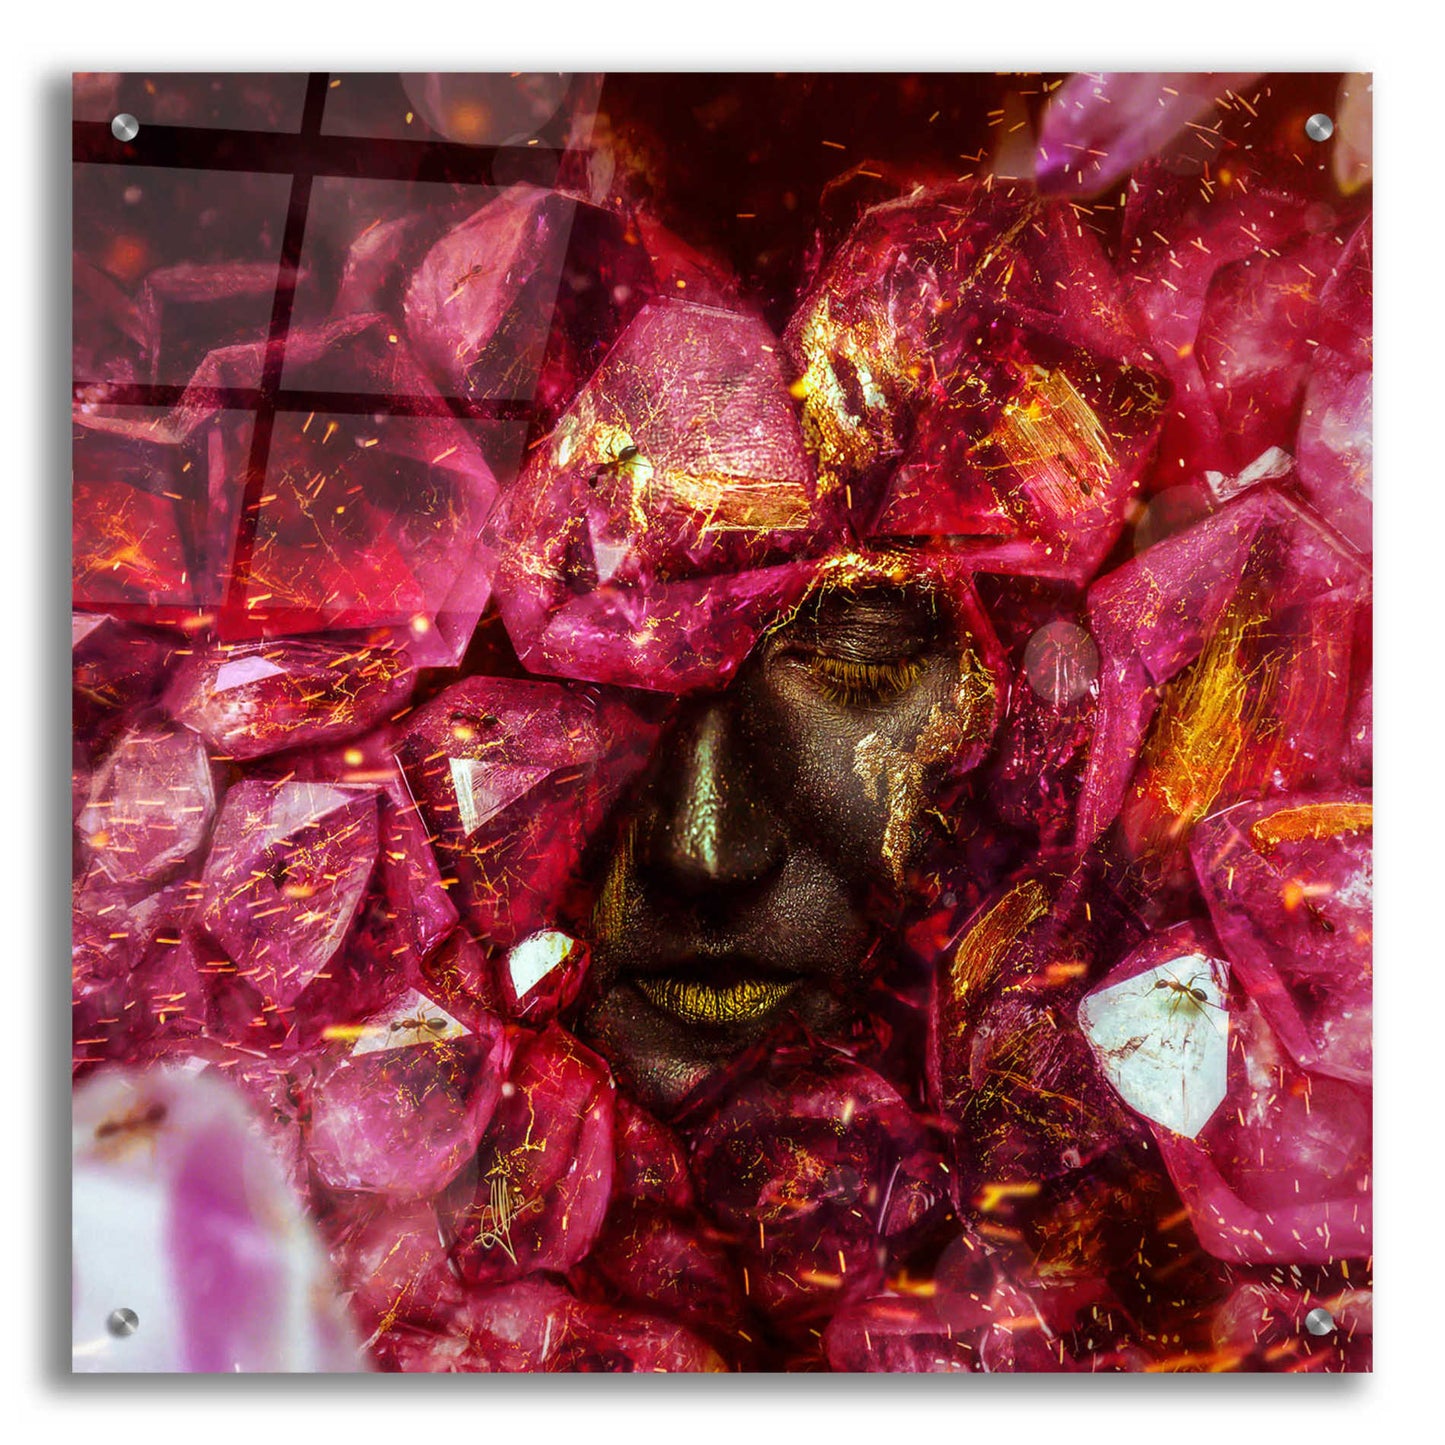 Epic Art 'States of the Matter - Crystallize' by Mario Sanchez Nevado, Acrylic Glass Wall Art,24x24